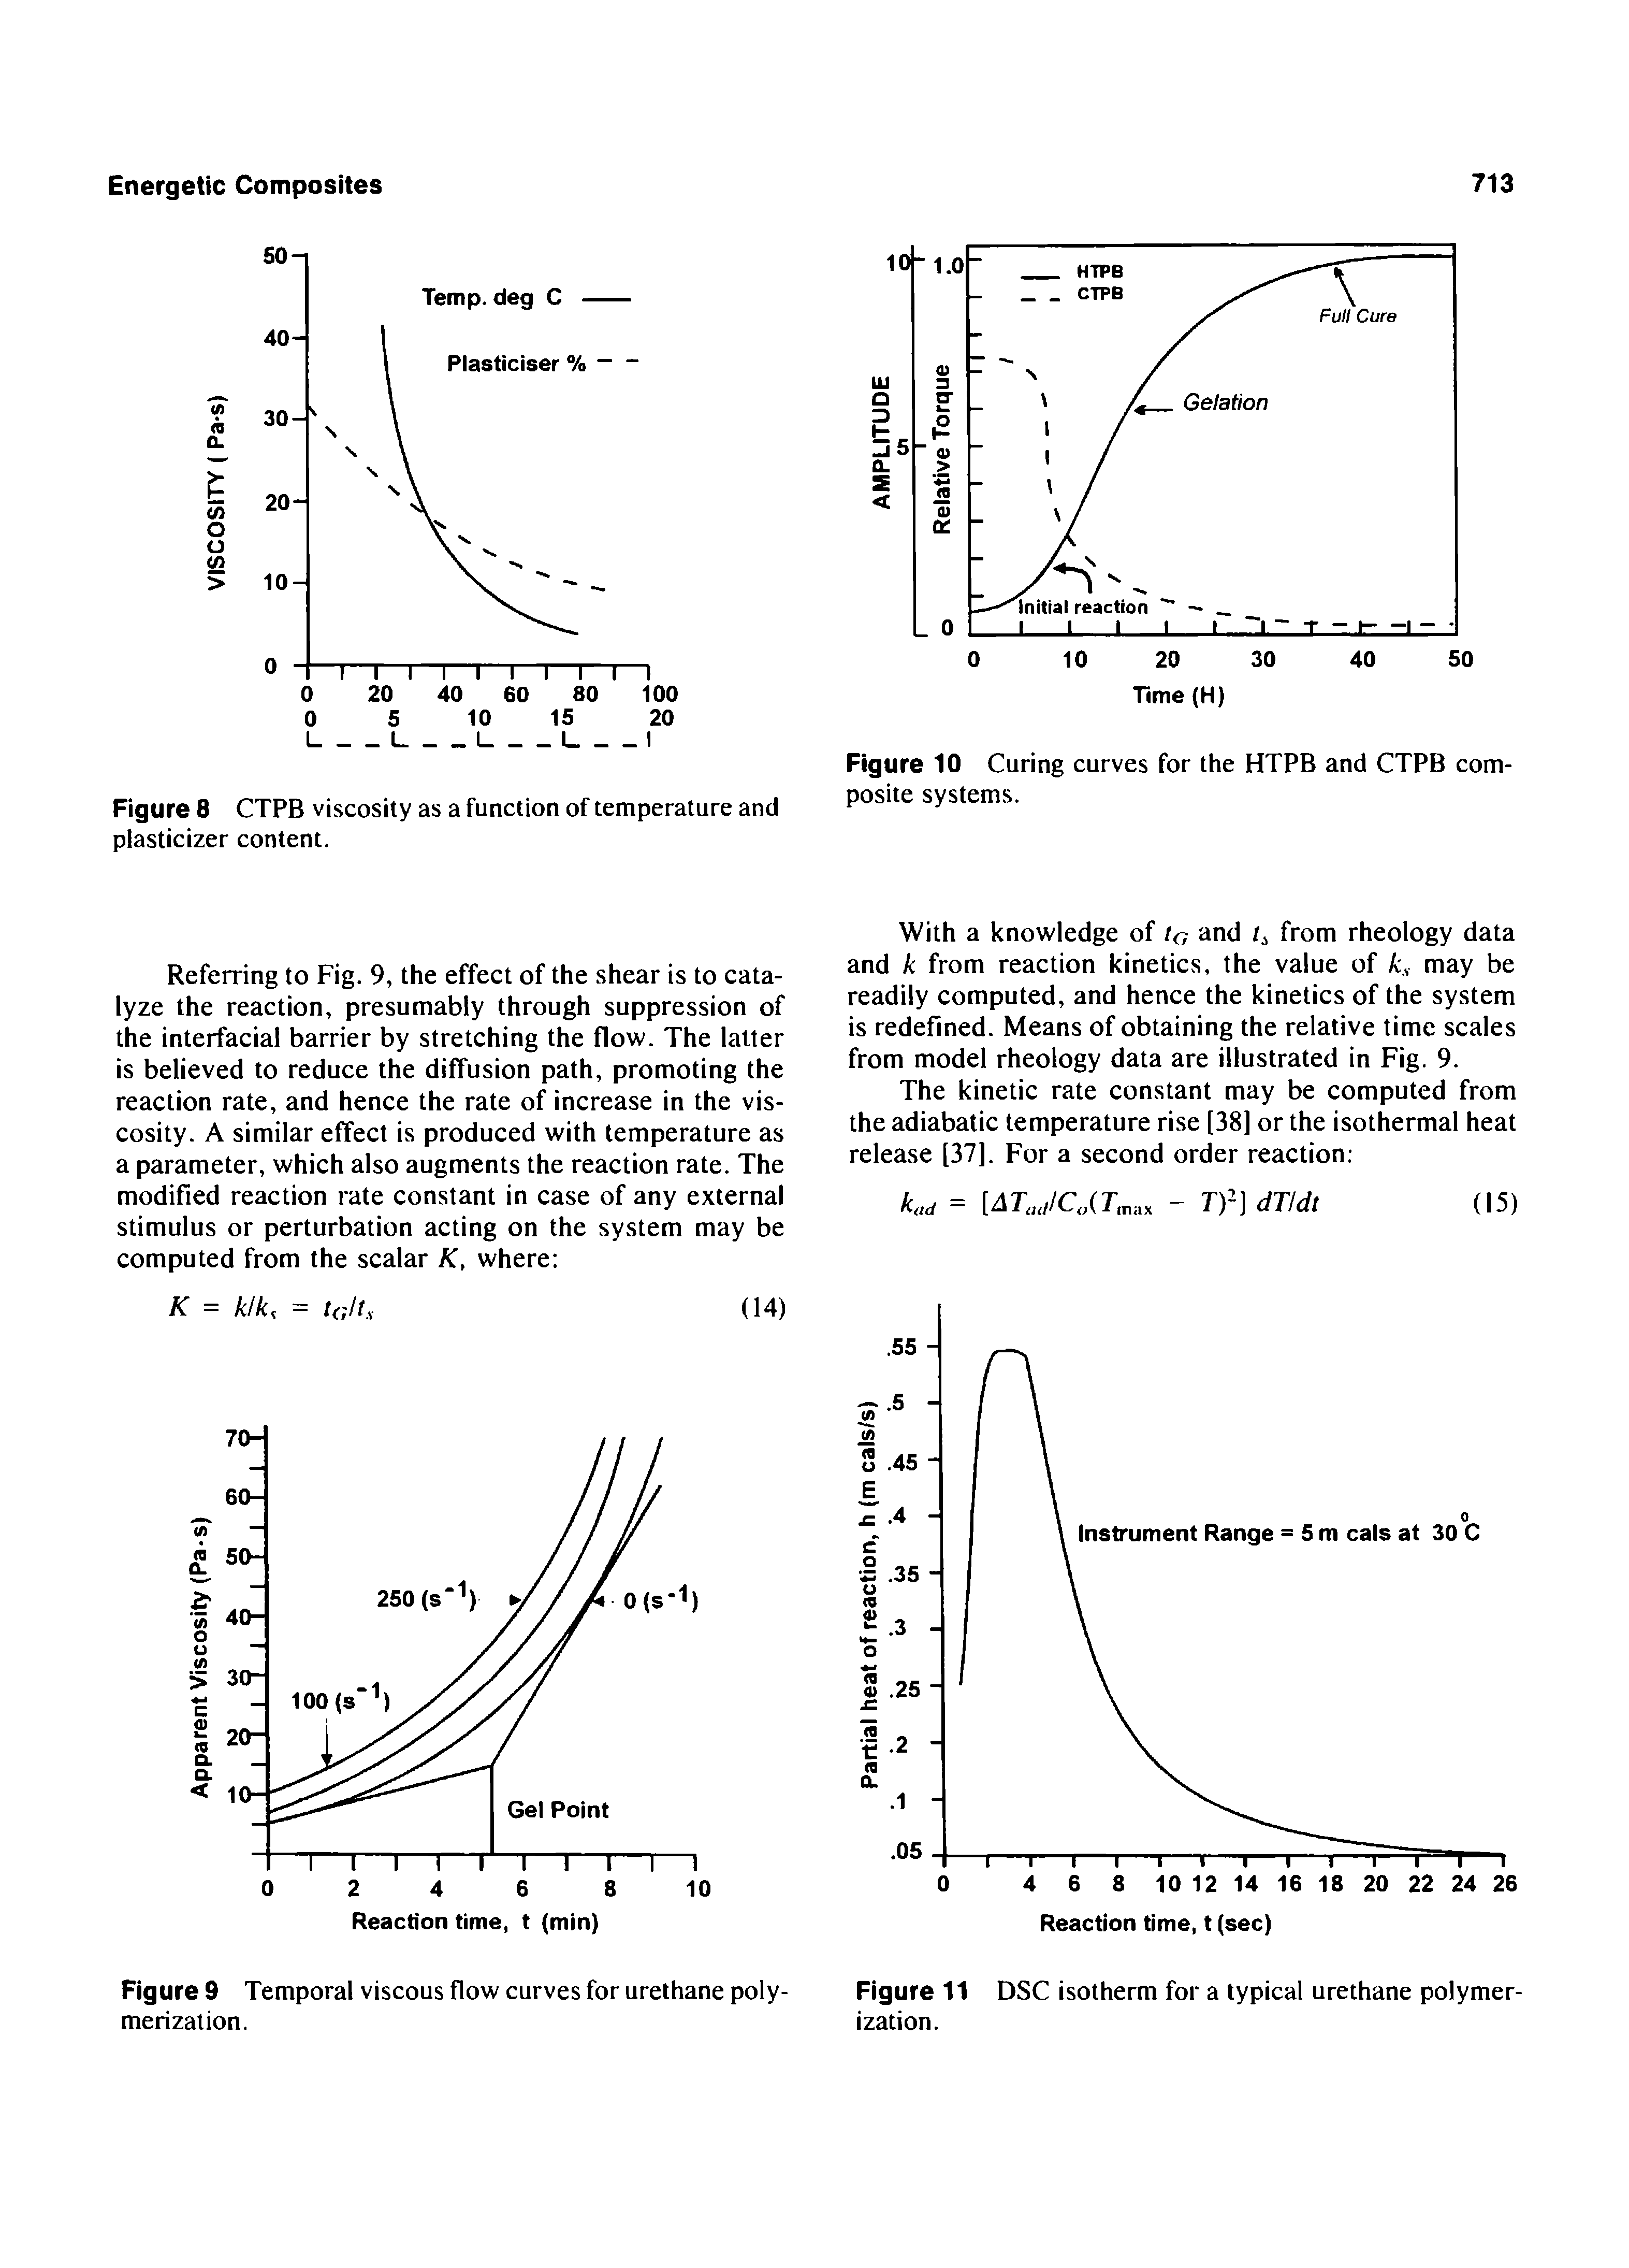 Figure 10 Curing curves for the HTPB and CTPB composite systems.